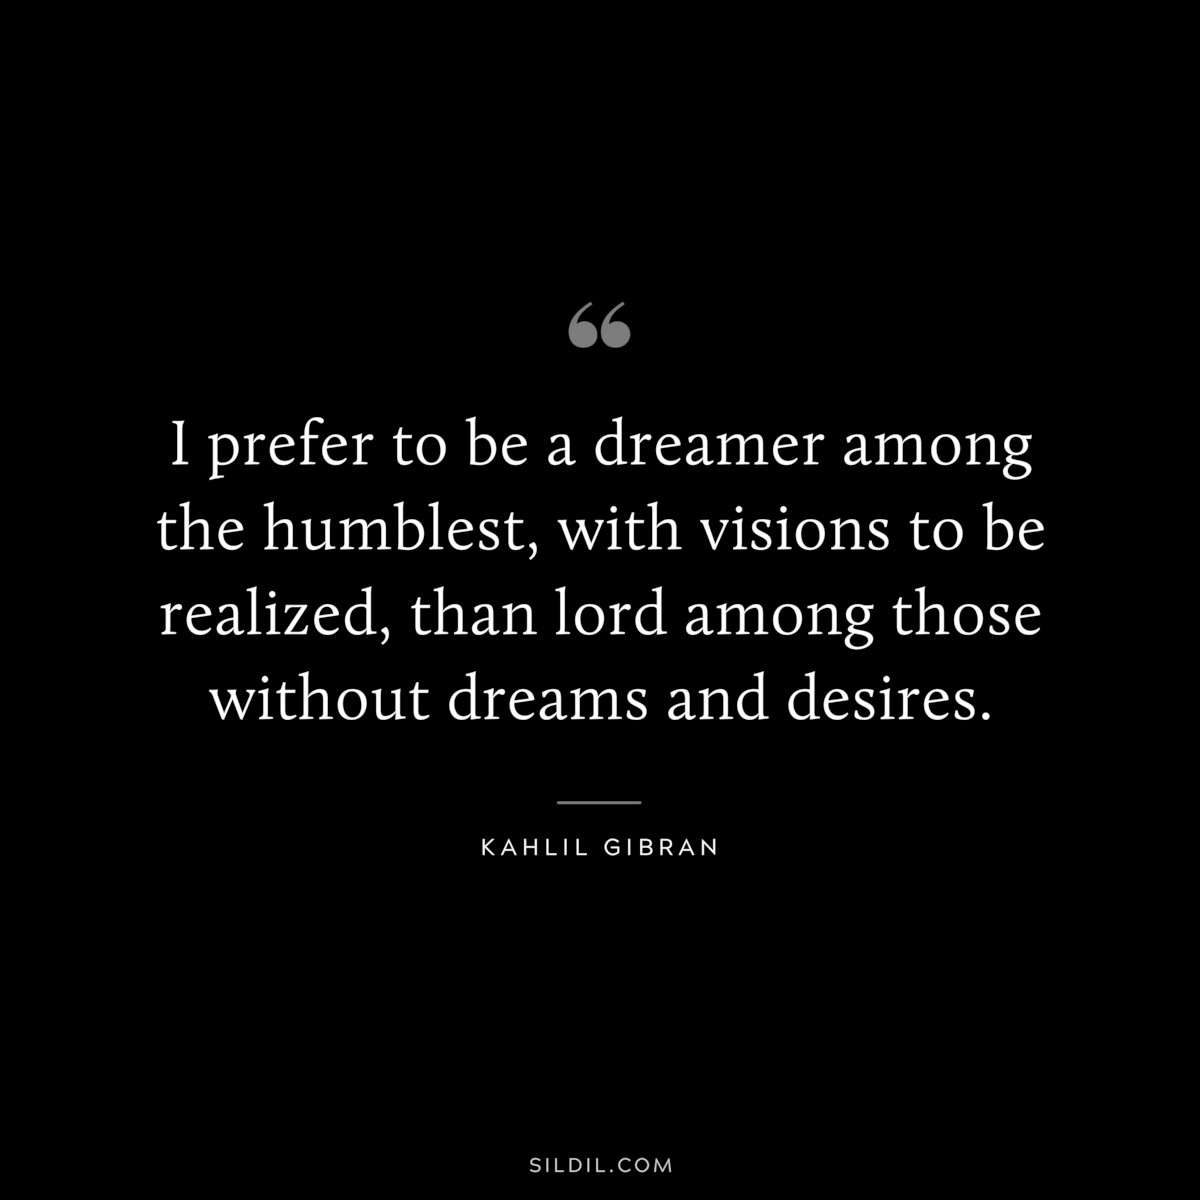 I prefer to be a dreamer among the humblest, with visions to be realized, than lord among those without dreams and desires. ― Kahlil Gibran